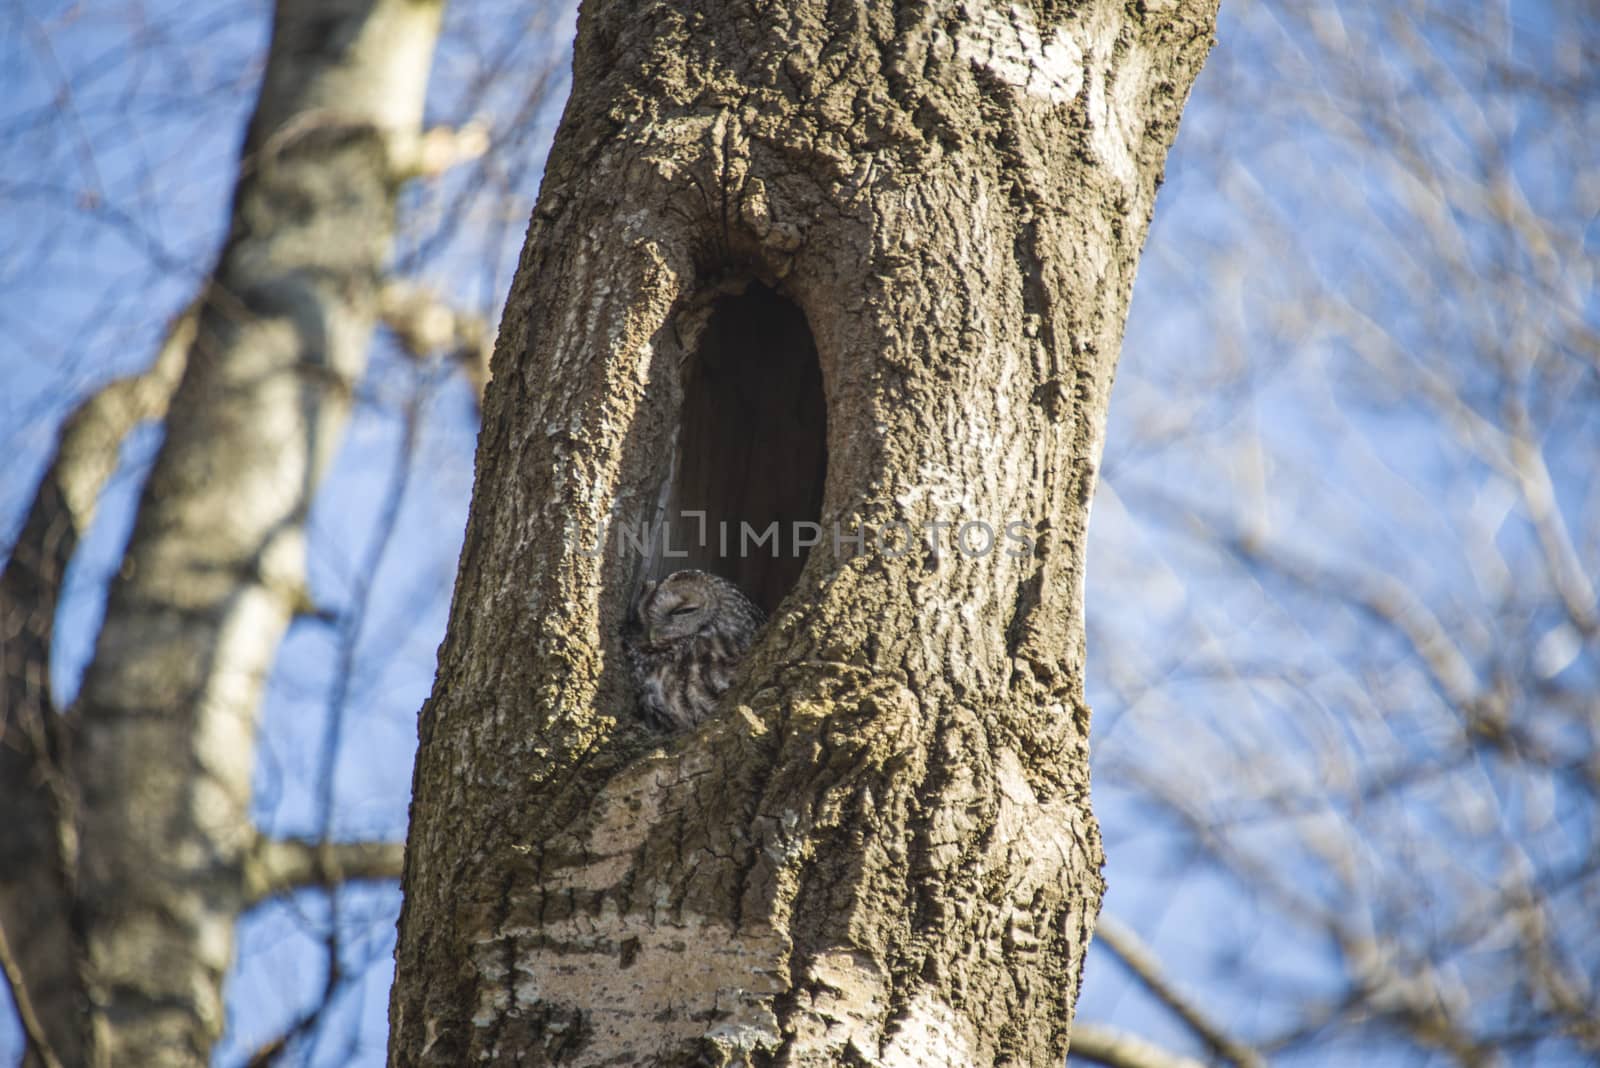 The image is shot in a older preserved deciduous forest  in Halden, Norway called Refne. The owl sits in a hole in the tree and have an overview of most of the forest. The image was shot one day in April 2013.